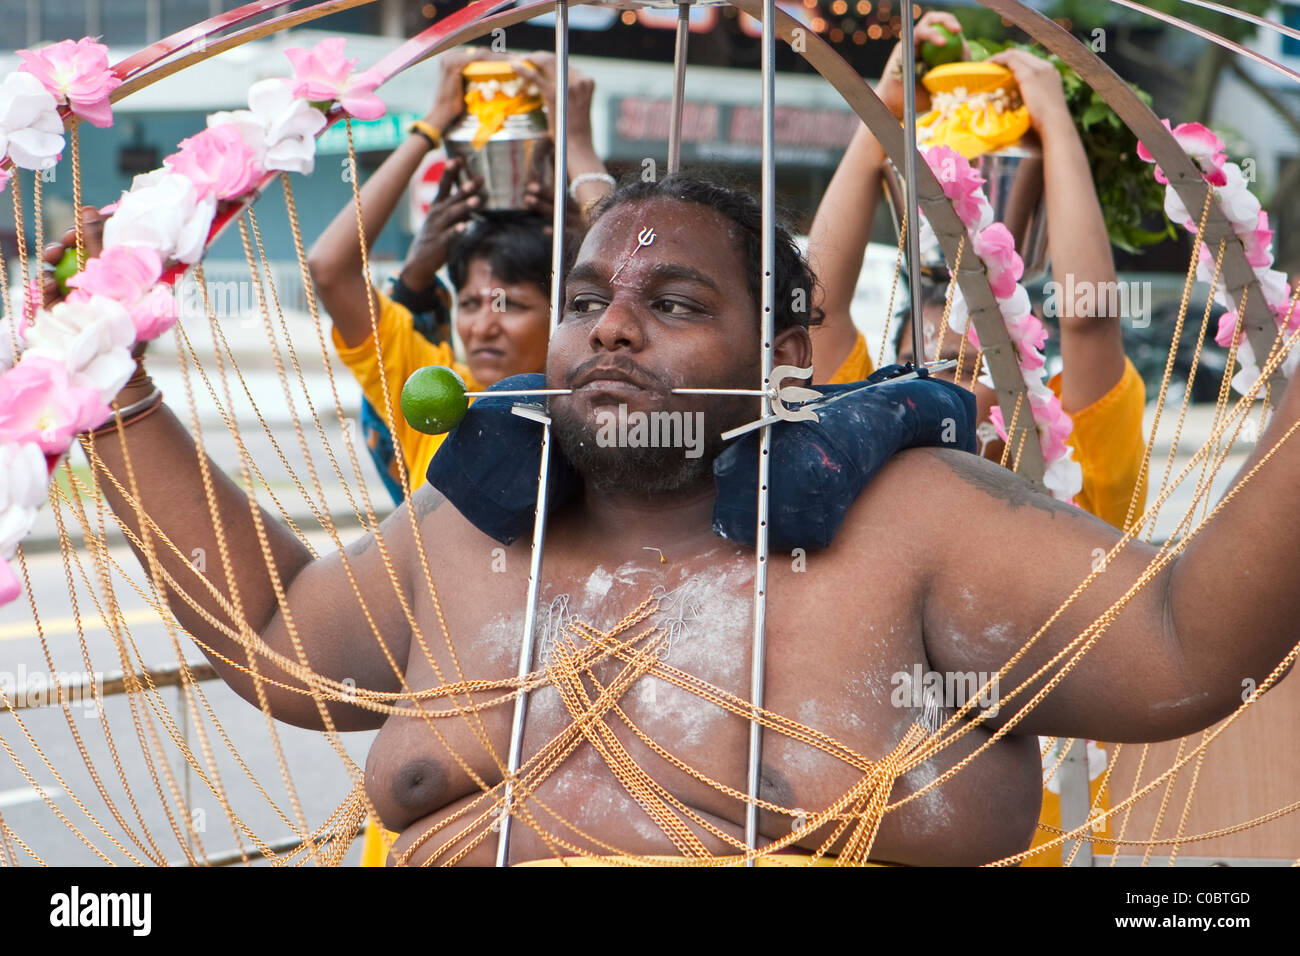 Thaipusam Hindu festival in Singapore where people show their faith by piercing their bodies with hooks and spikes Stock Photo